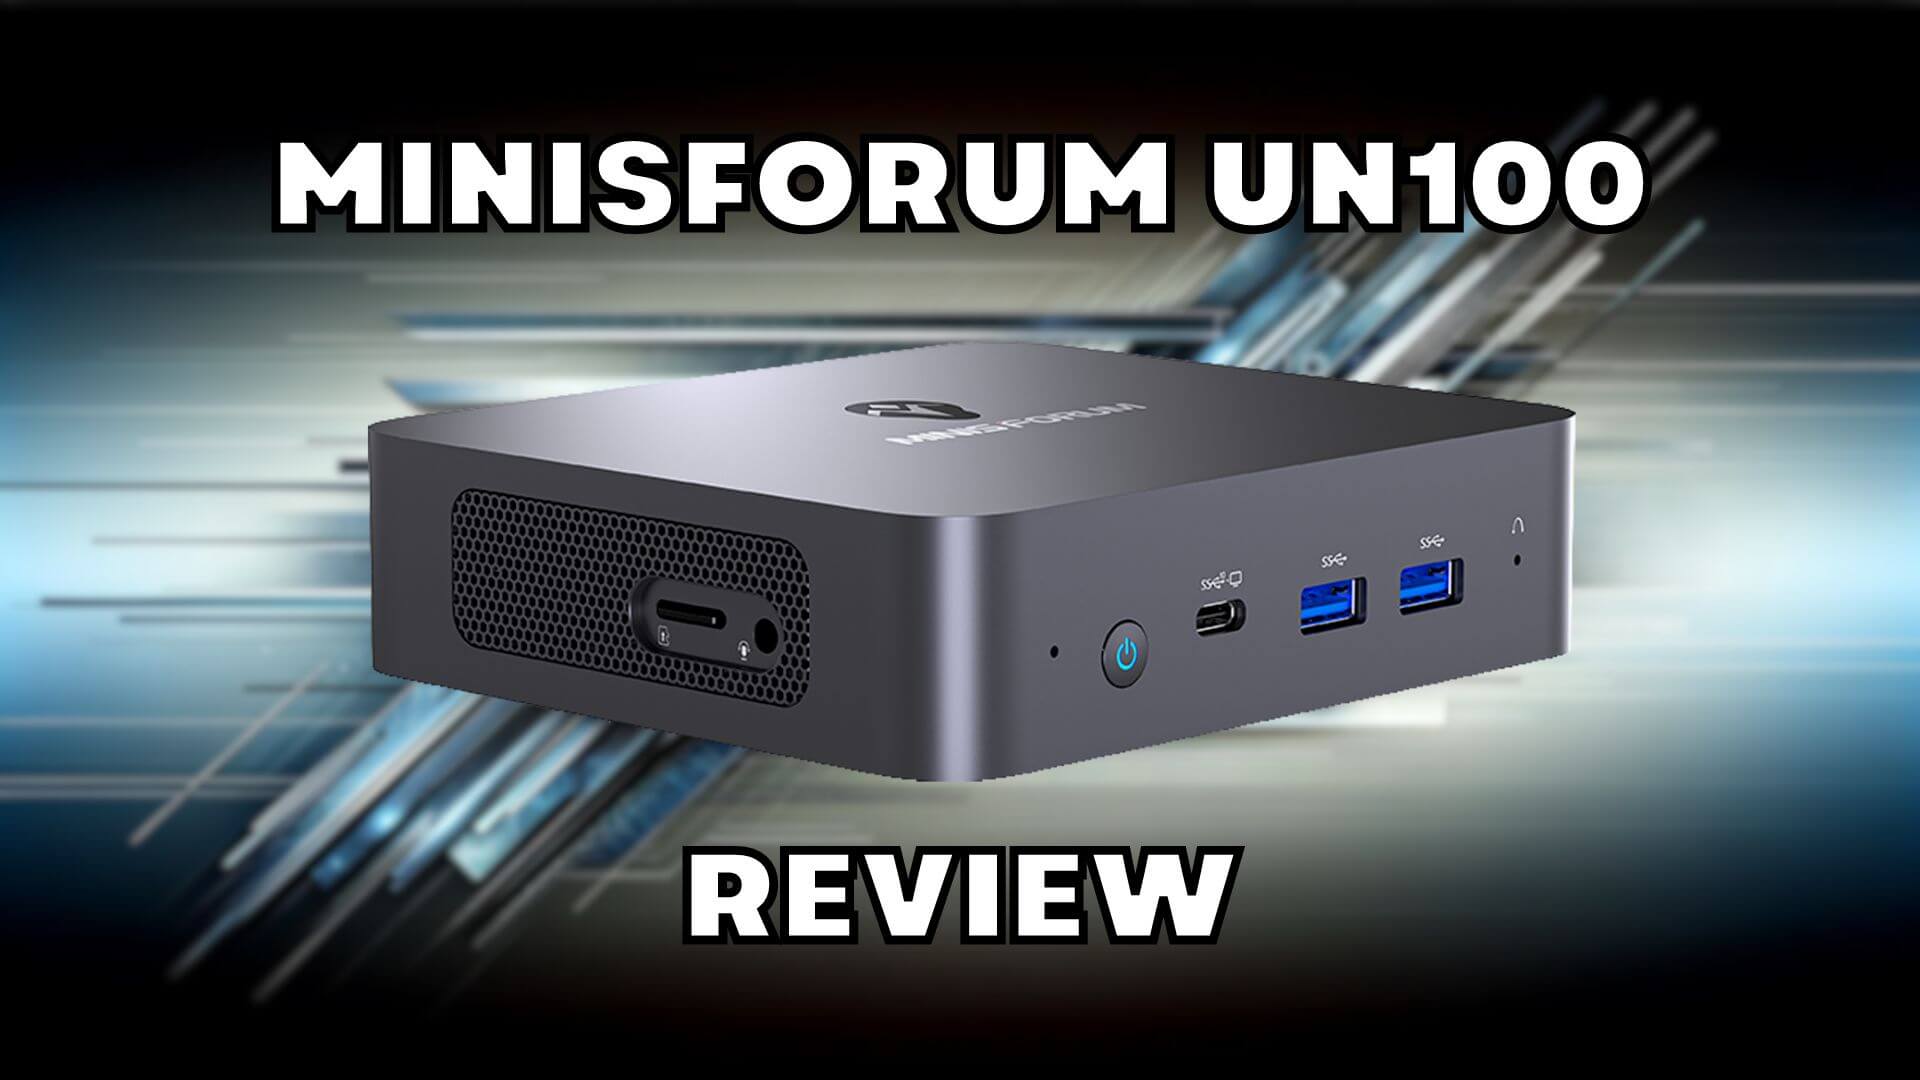 Minisforum UN100 review – Awesome high performance, low cost mini PC